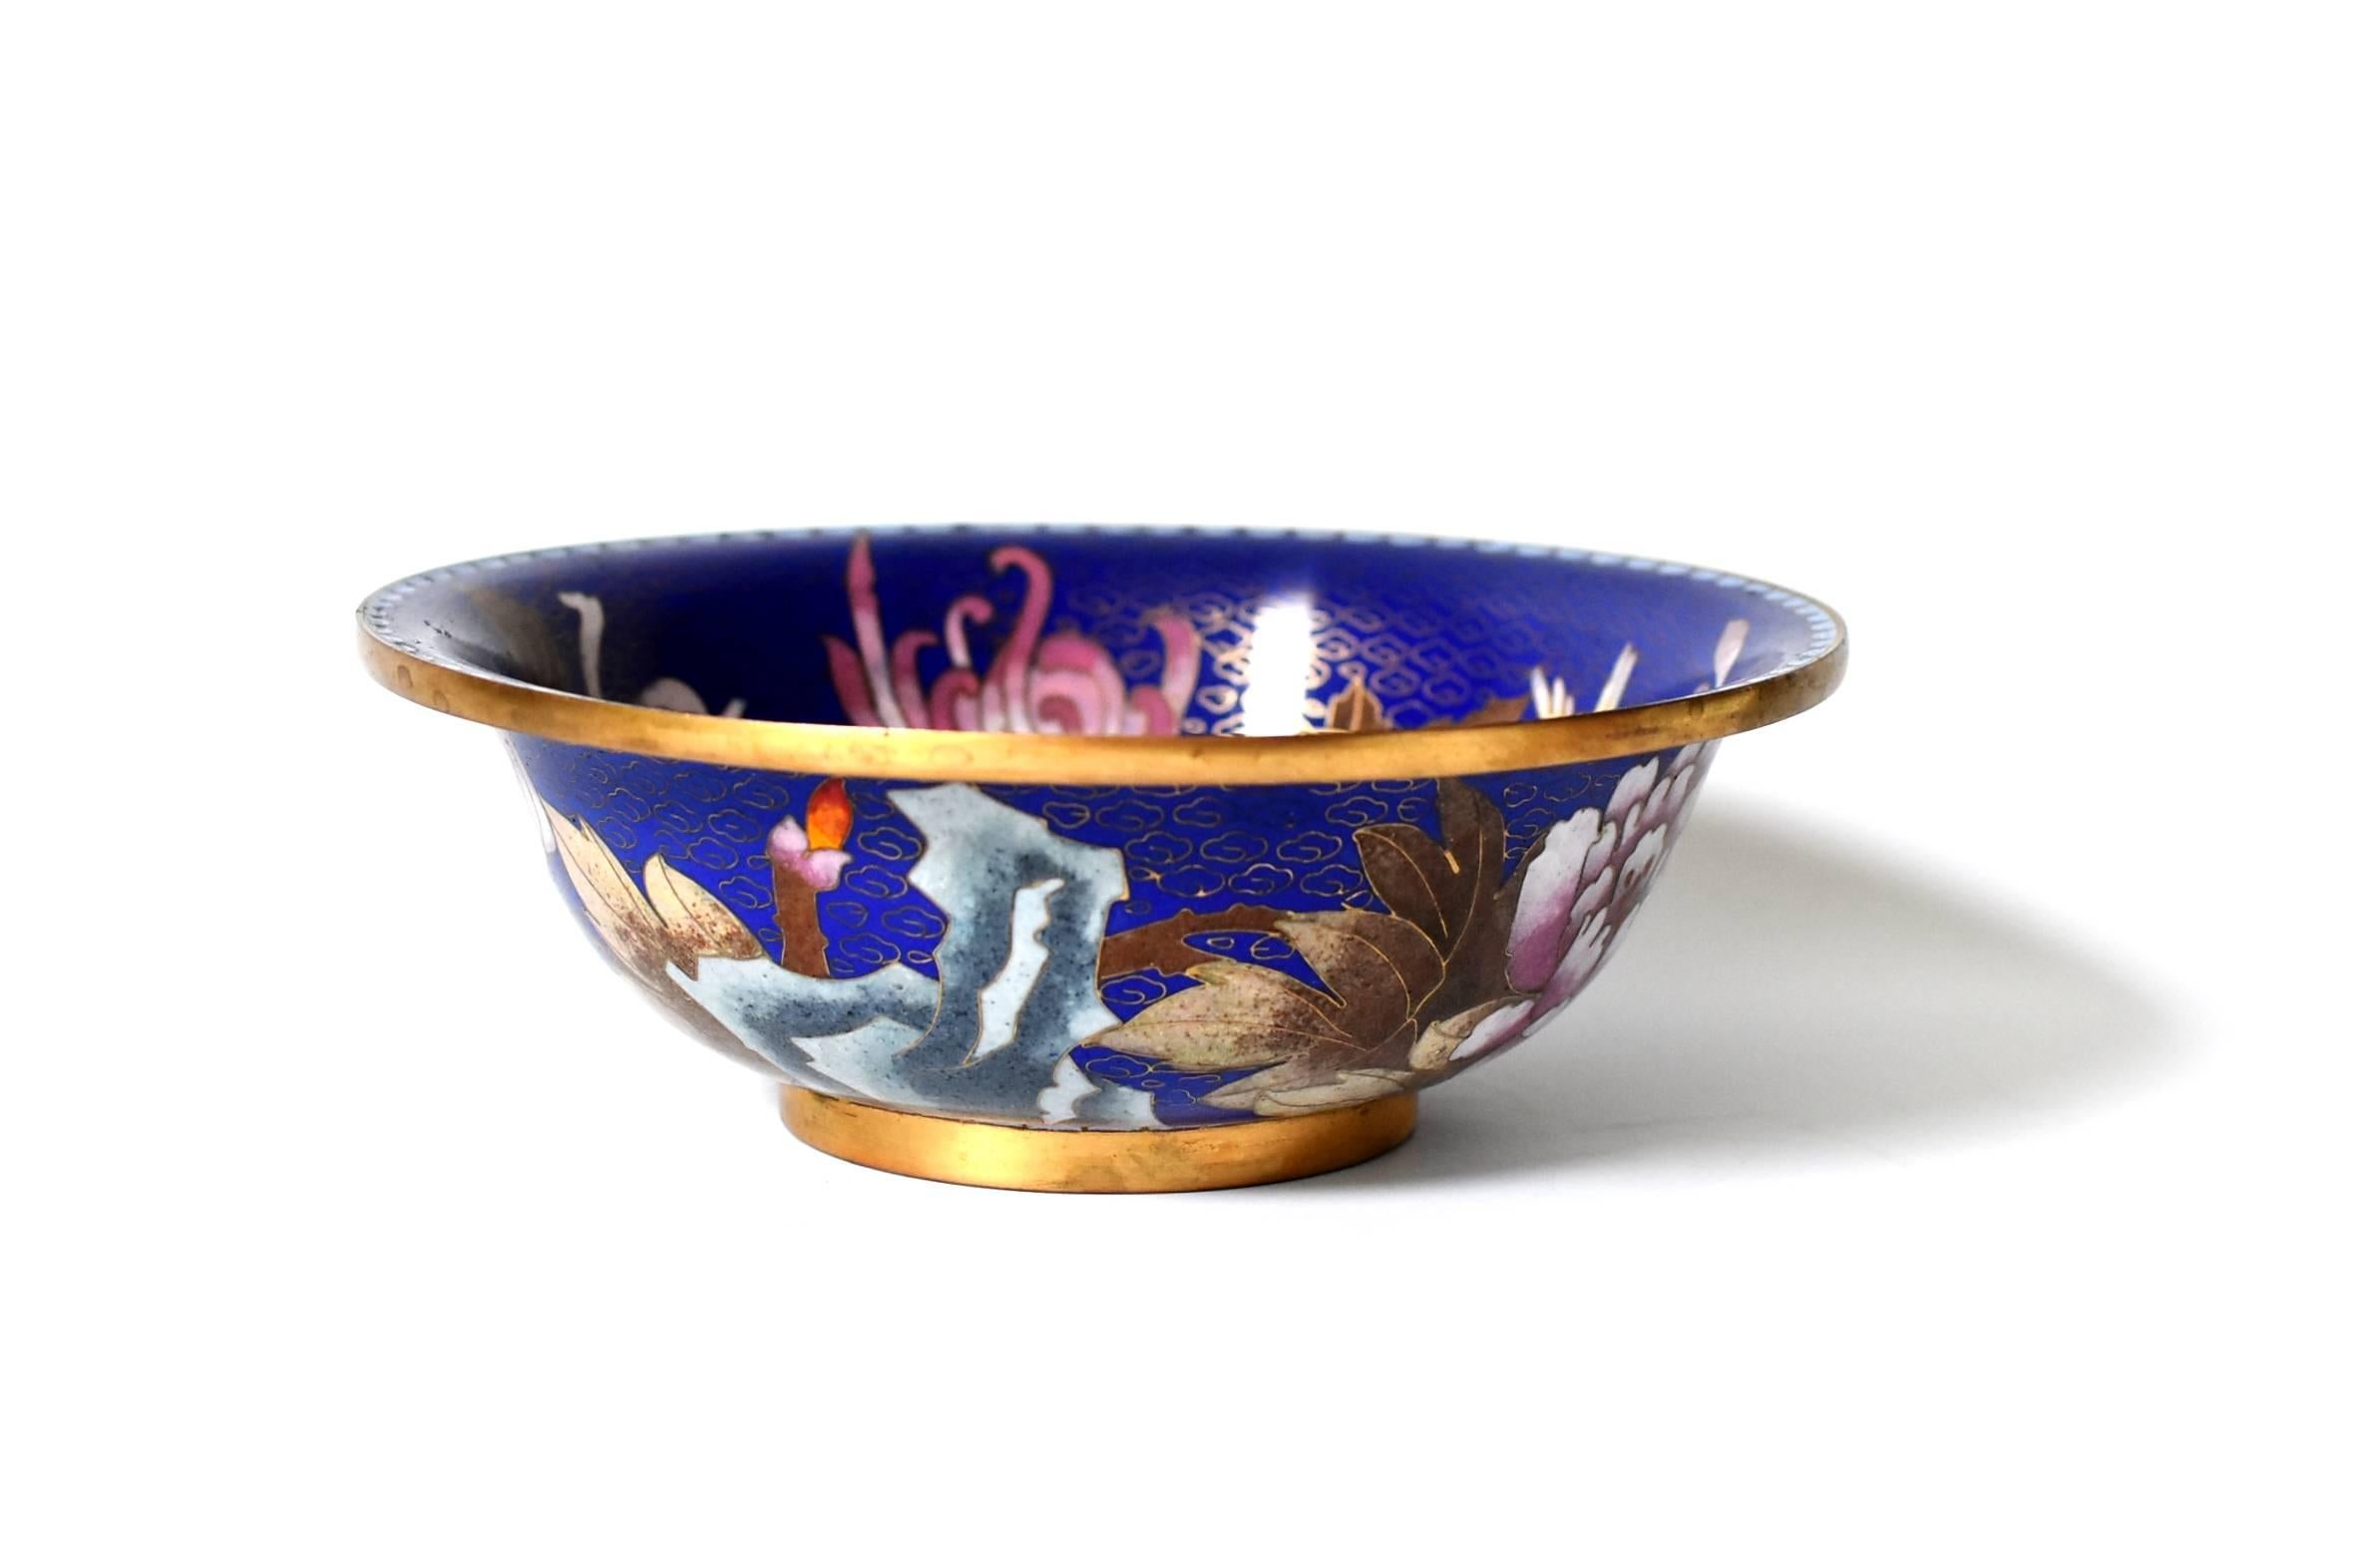 Absolute beautiful cloisonné bowl with the purest lapis blue color base. Pink chrysanthemums and peonies, canary bird, grey rocks. The colors are made of natural marble grounded and painstakingly inlaid in the brass perimeters. The beauty of the